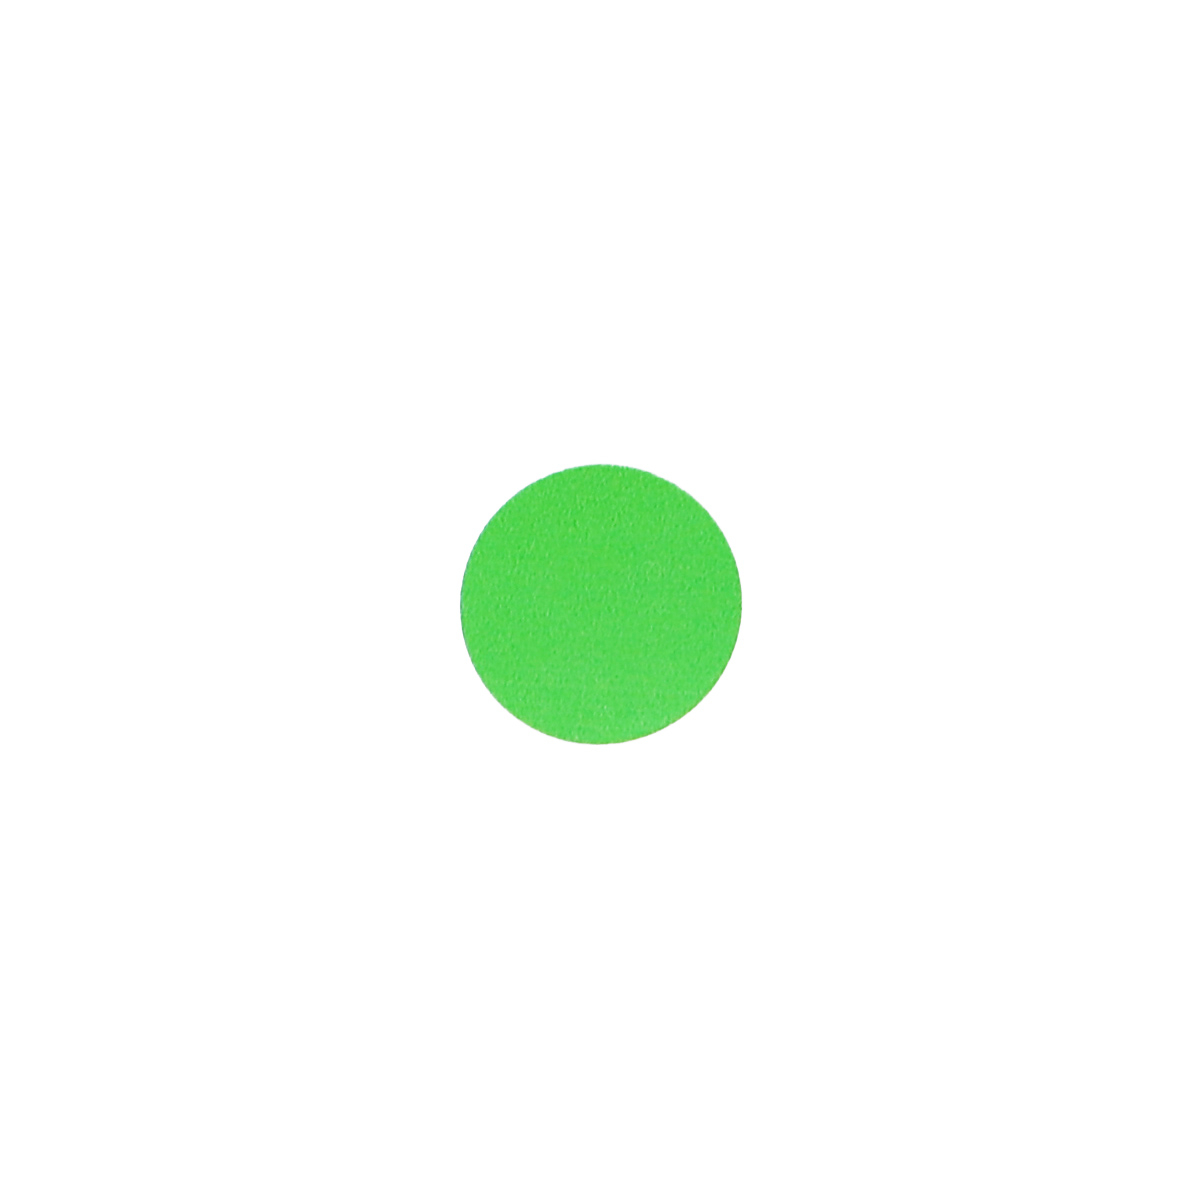 1/2 inch Permanent Round, Color-Code Dot Stickers: 1,000/Box, Green